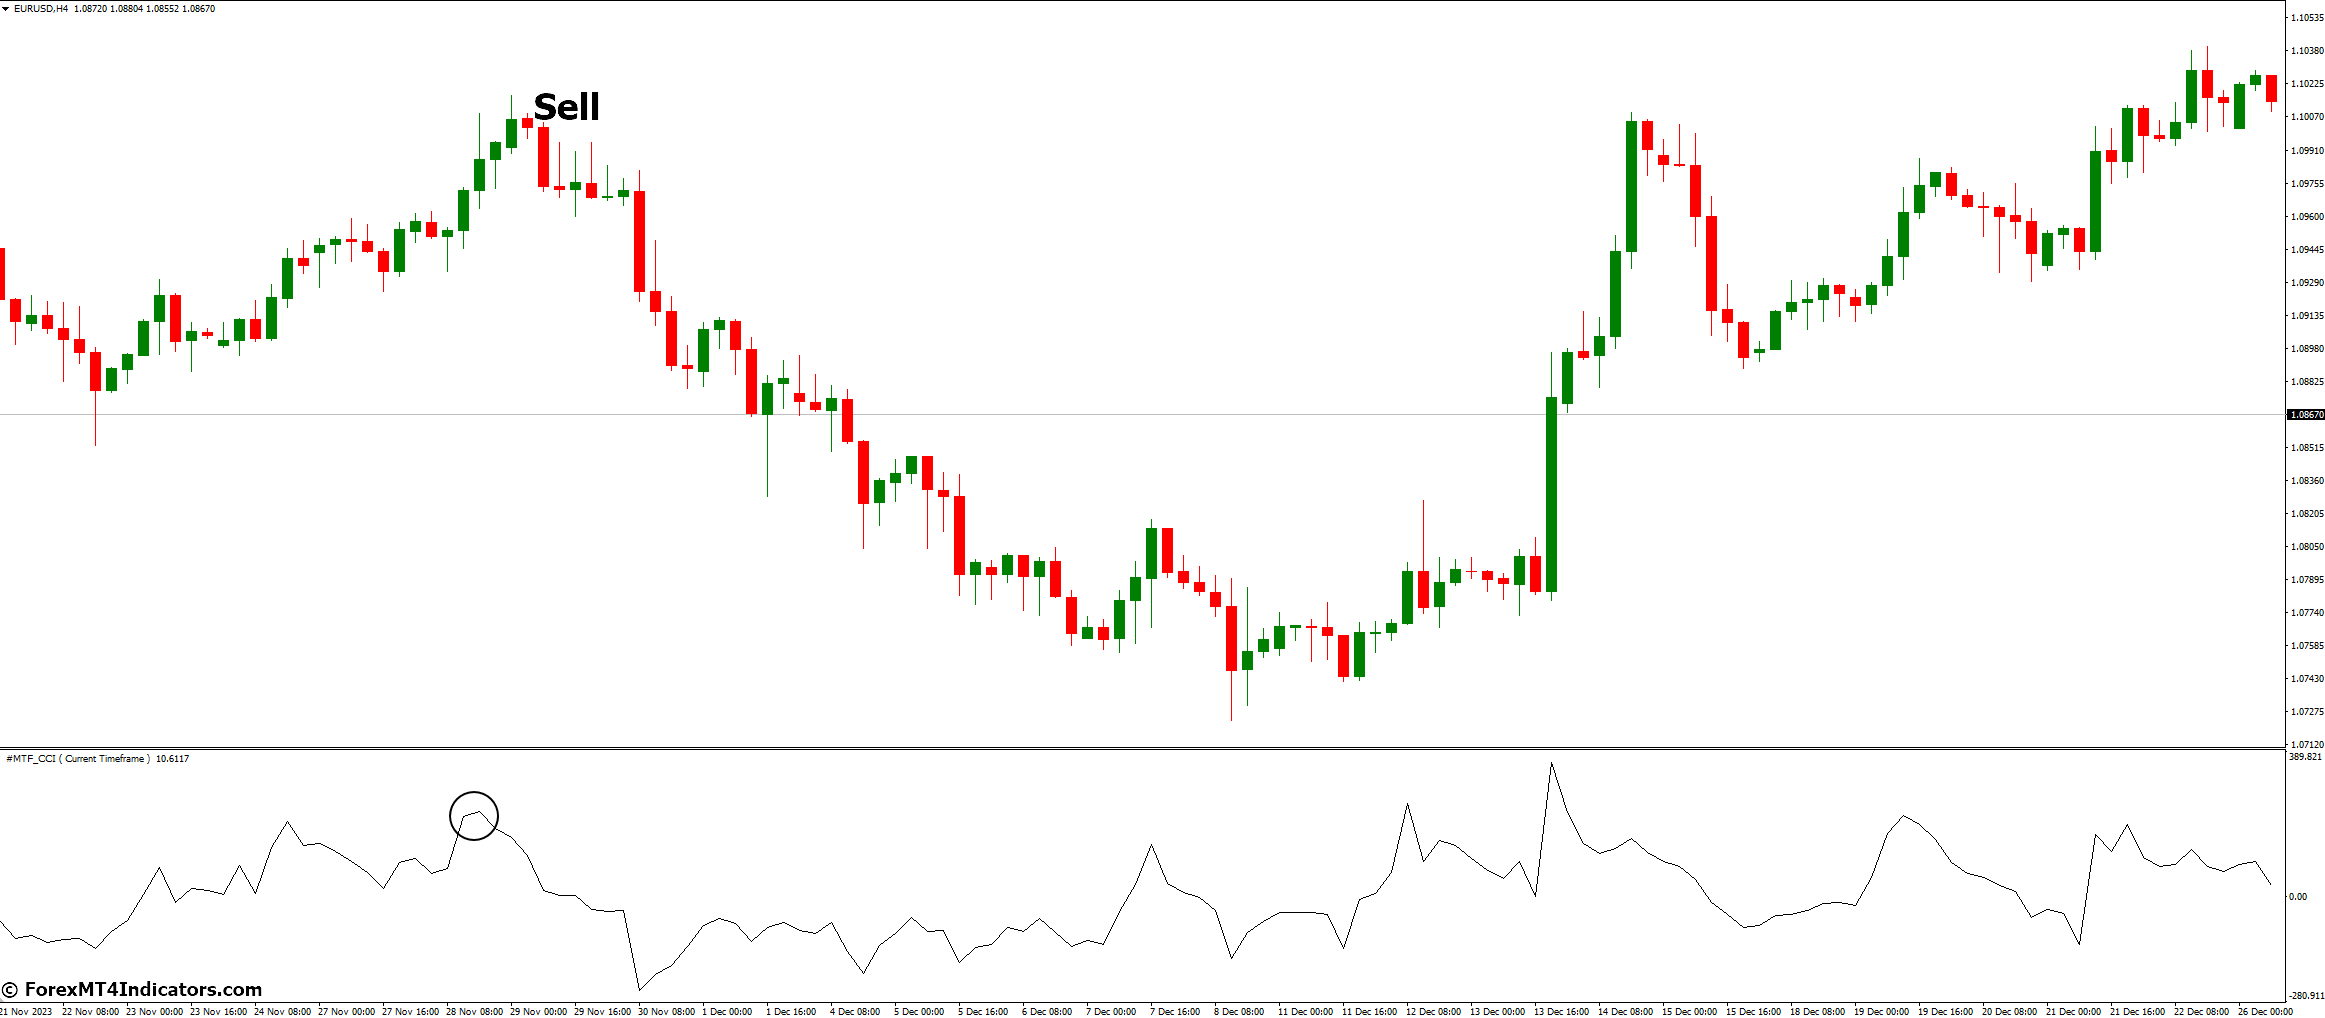  How to Trade with MTF CCI Indicator - Sell Entry